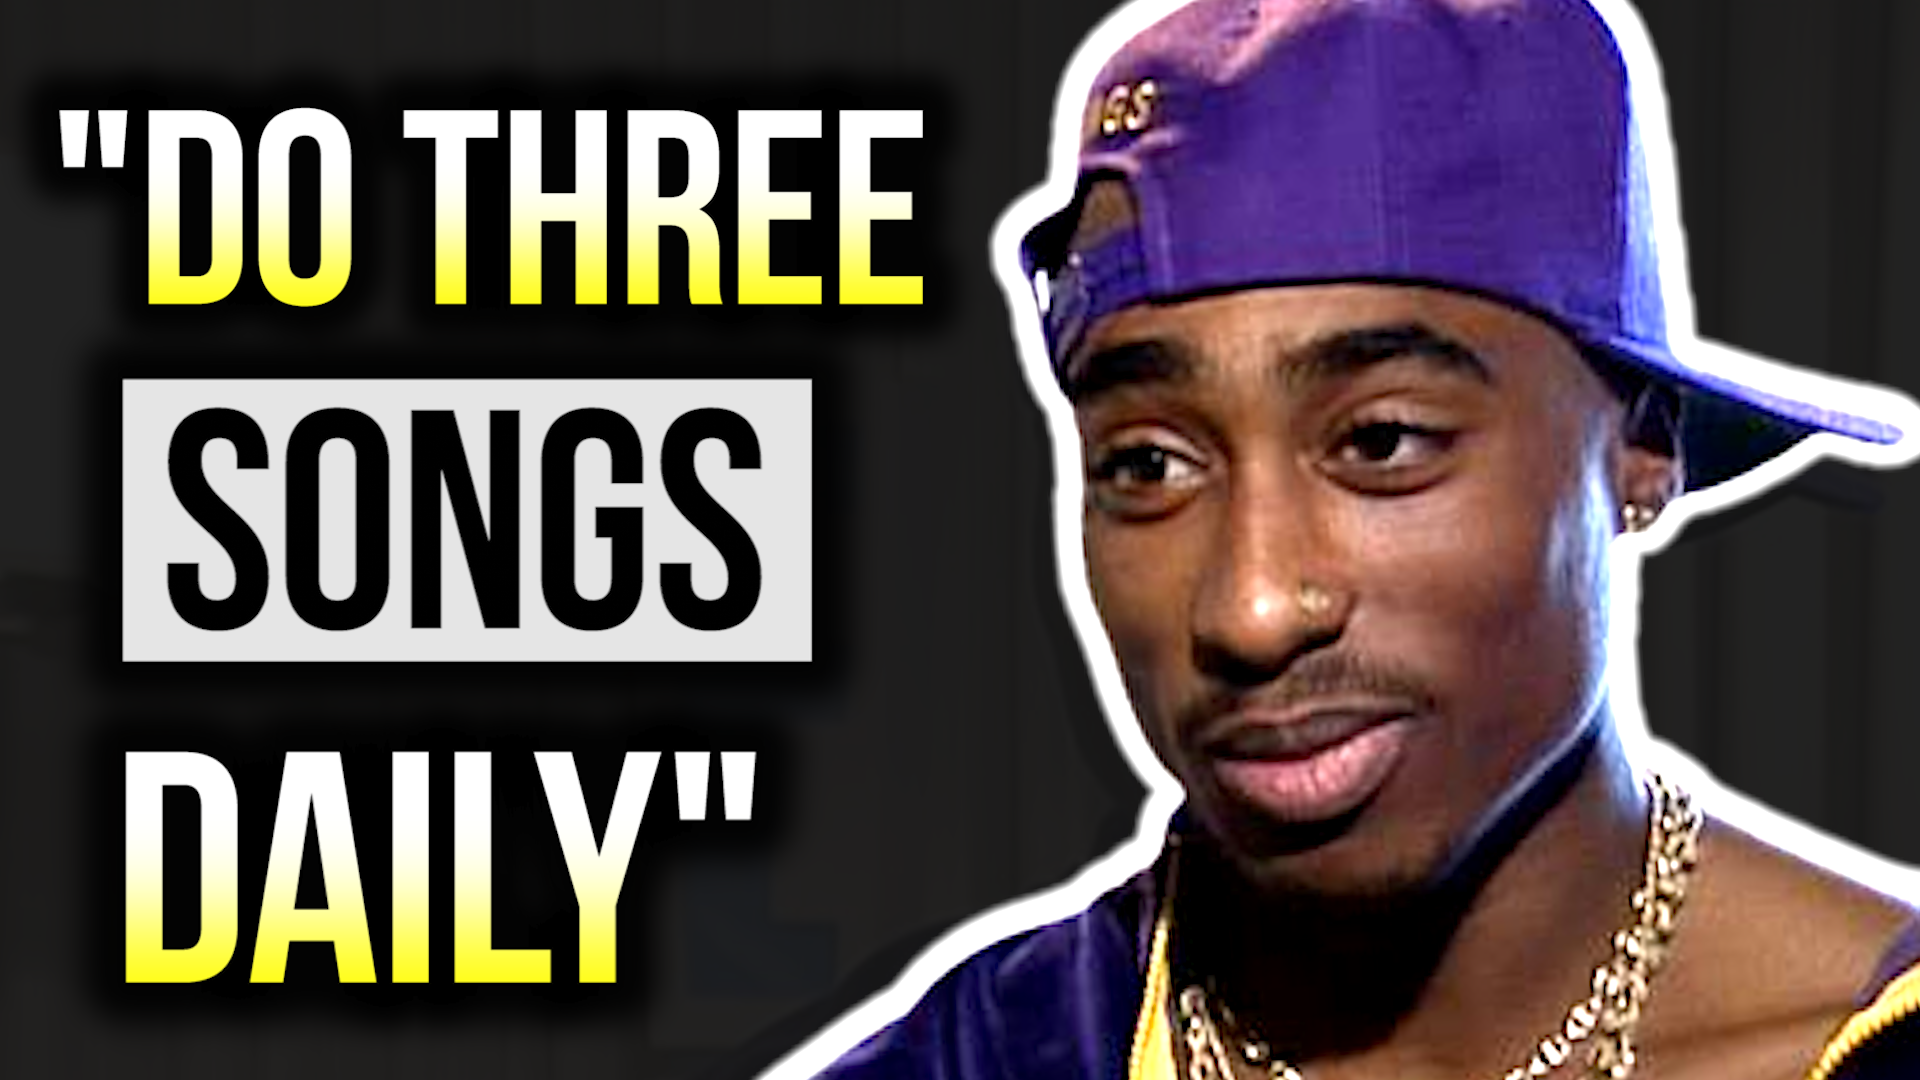 How To Write A Rap Song Like 2Pac, Step-By-Step 